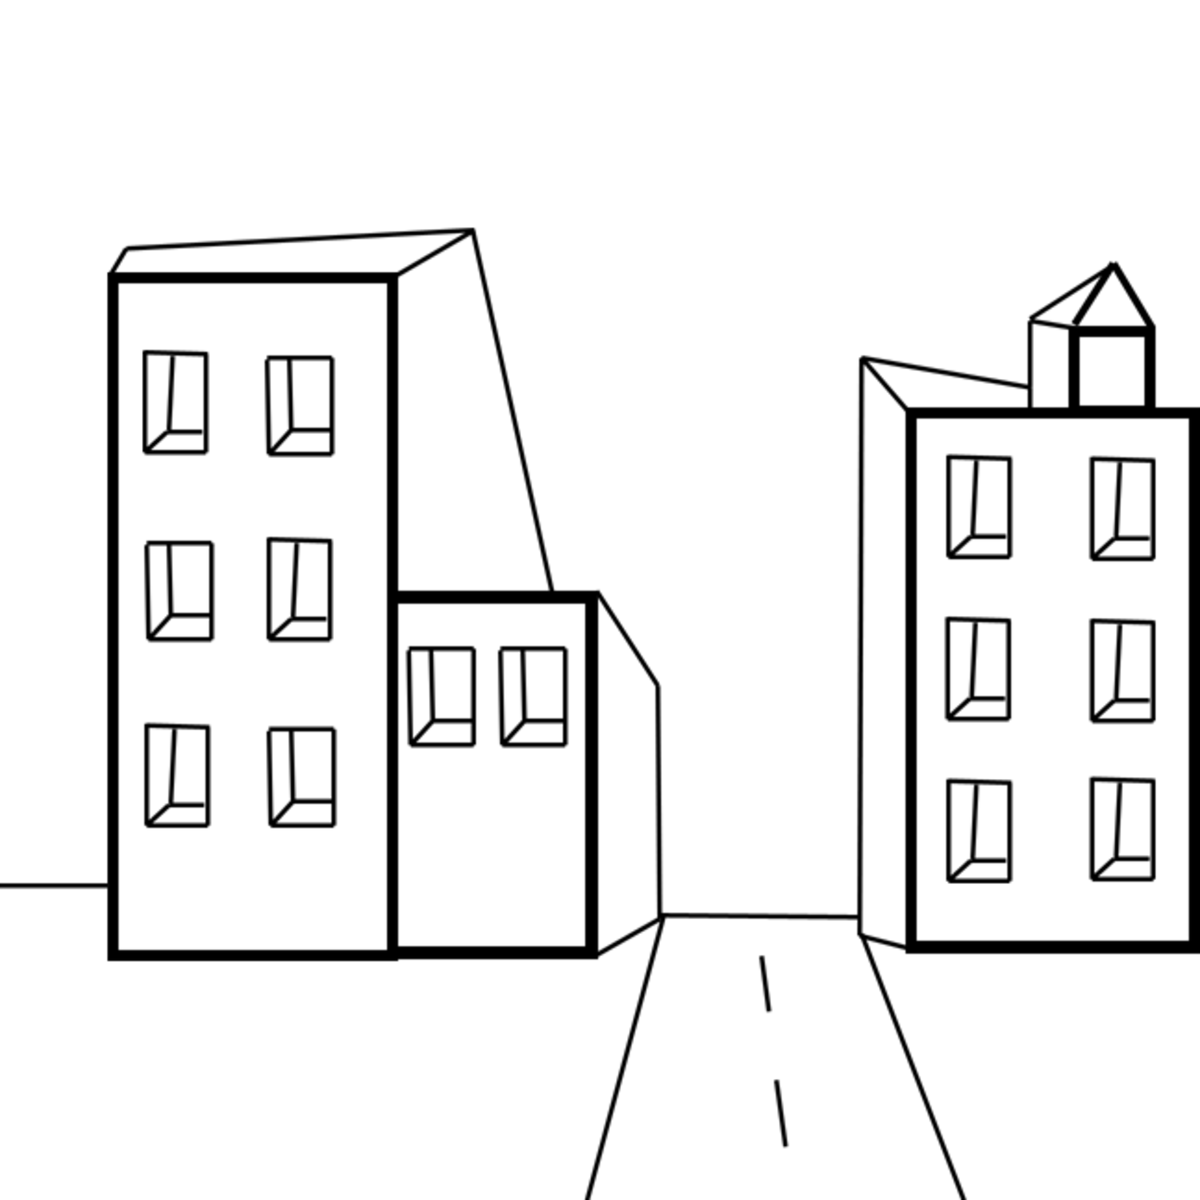 Simple single point perspective drawing hubpages